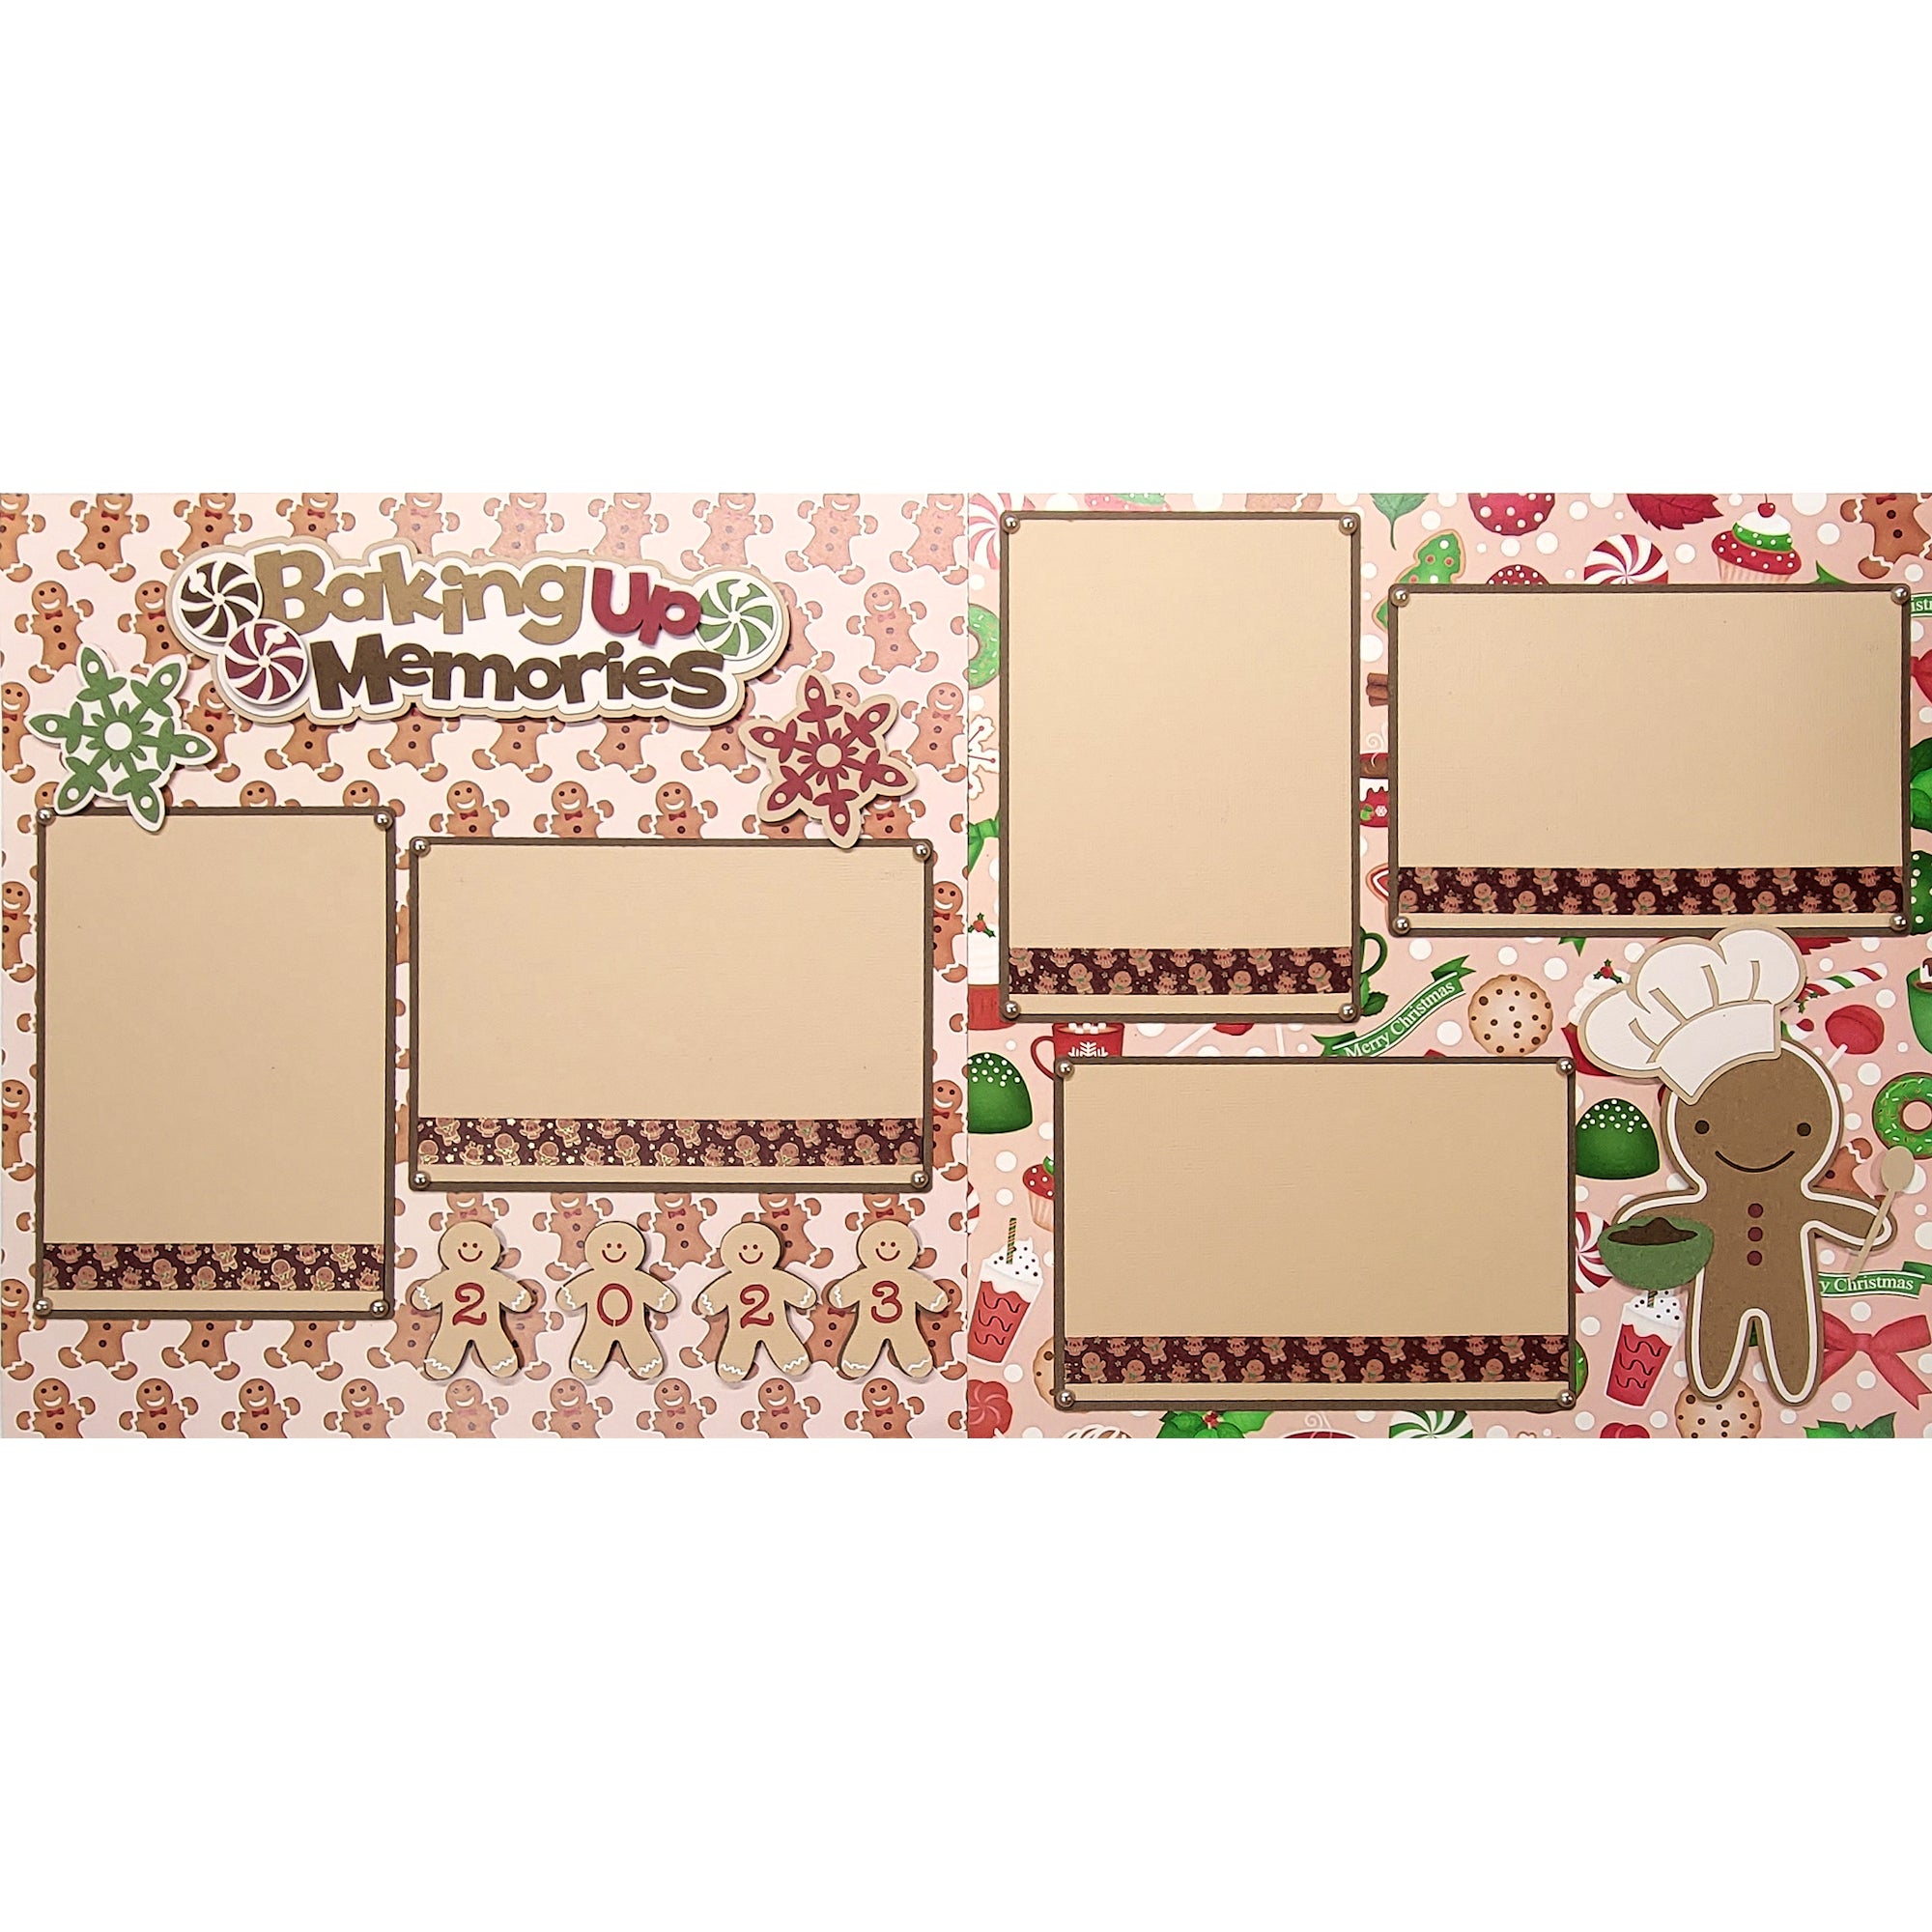 Baking Up Memories Gingerbread (2) - 12 x 12 Pages, Fully-Assembled & Hand-Crafted 3D Scrapbook Premade by SSC Designs